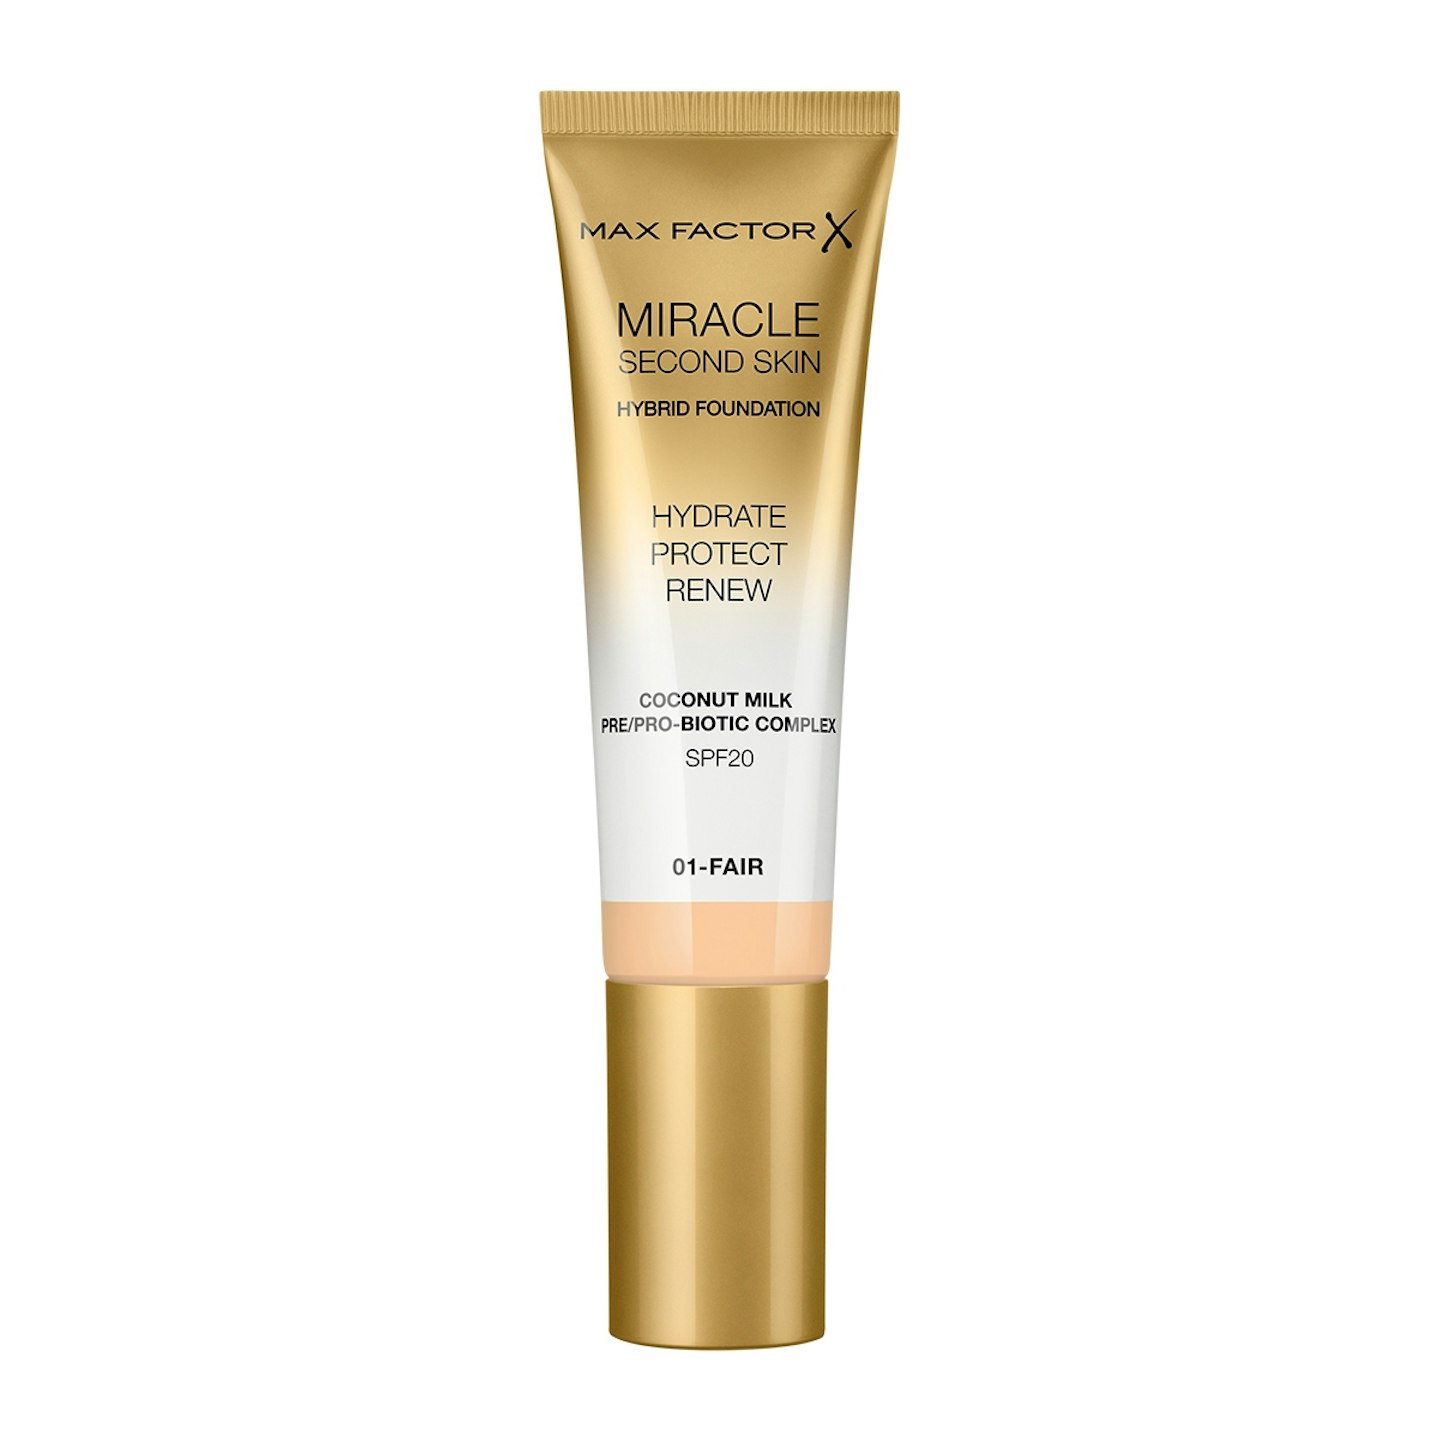 Max Factor Miracle Touch Second Skin Foundation, £12.99